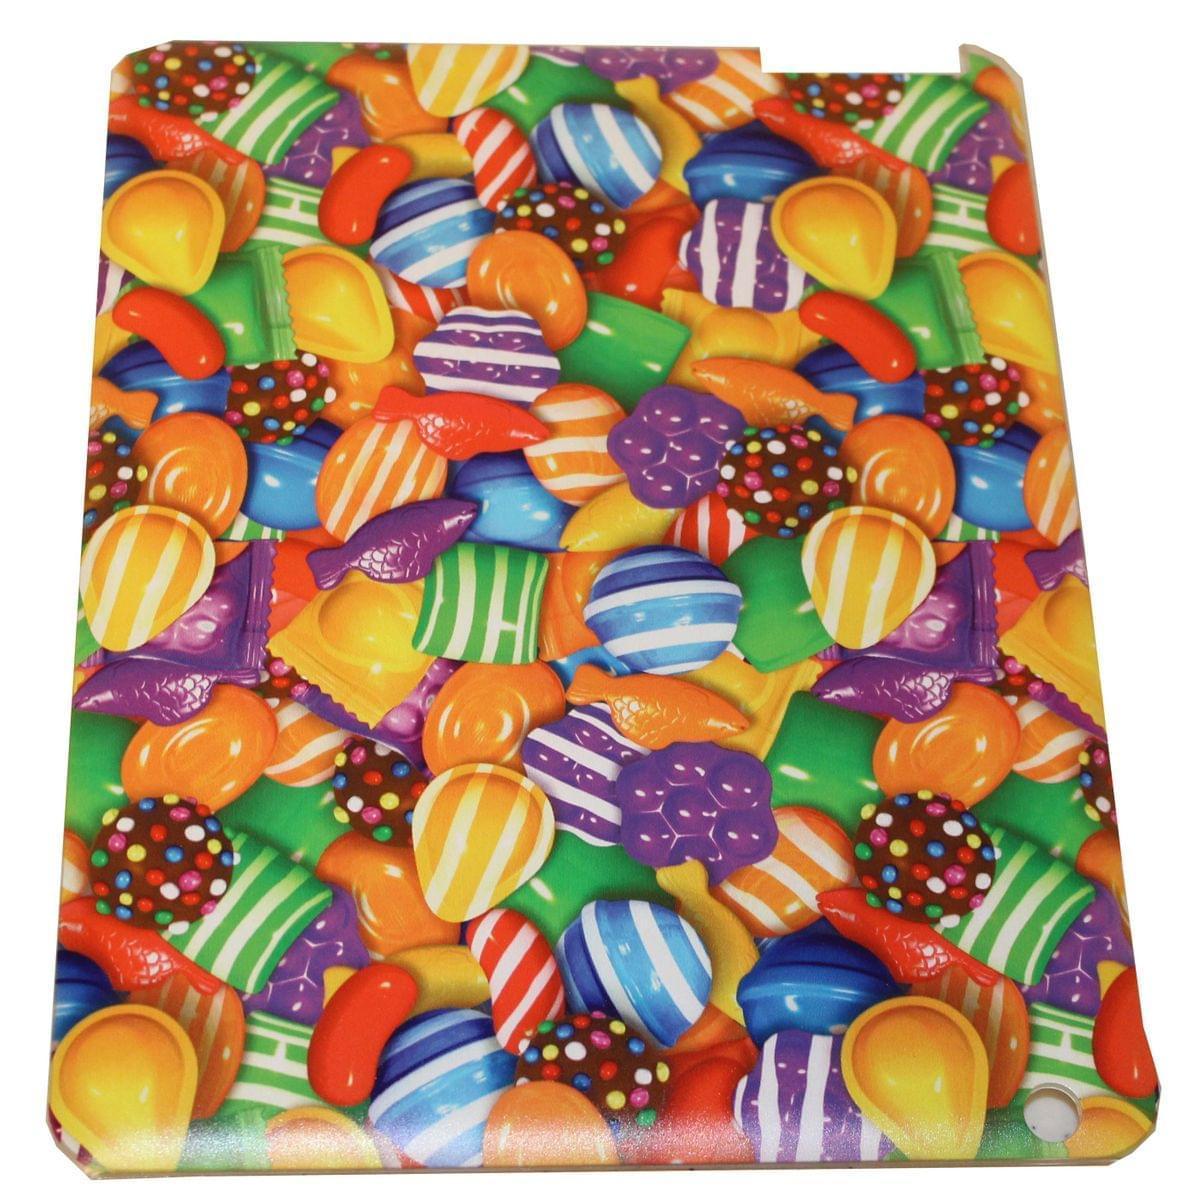 Candy Crush App Logo - Candy Crush iPad Hard Case Multi Color With Fish - Toynk Toys